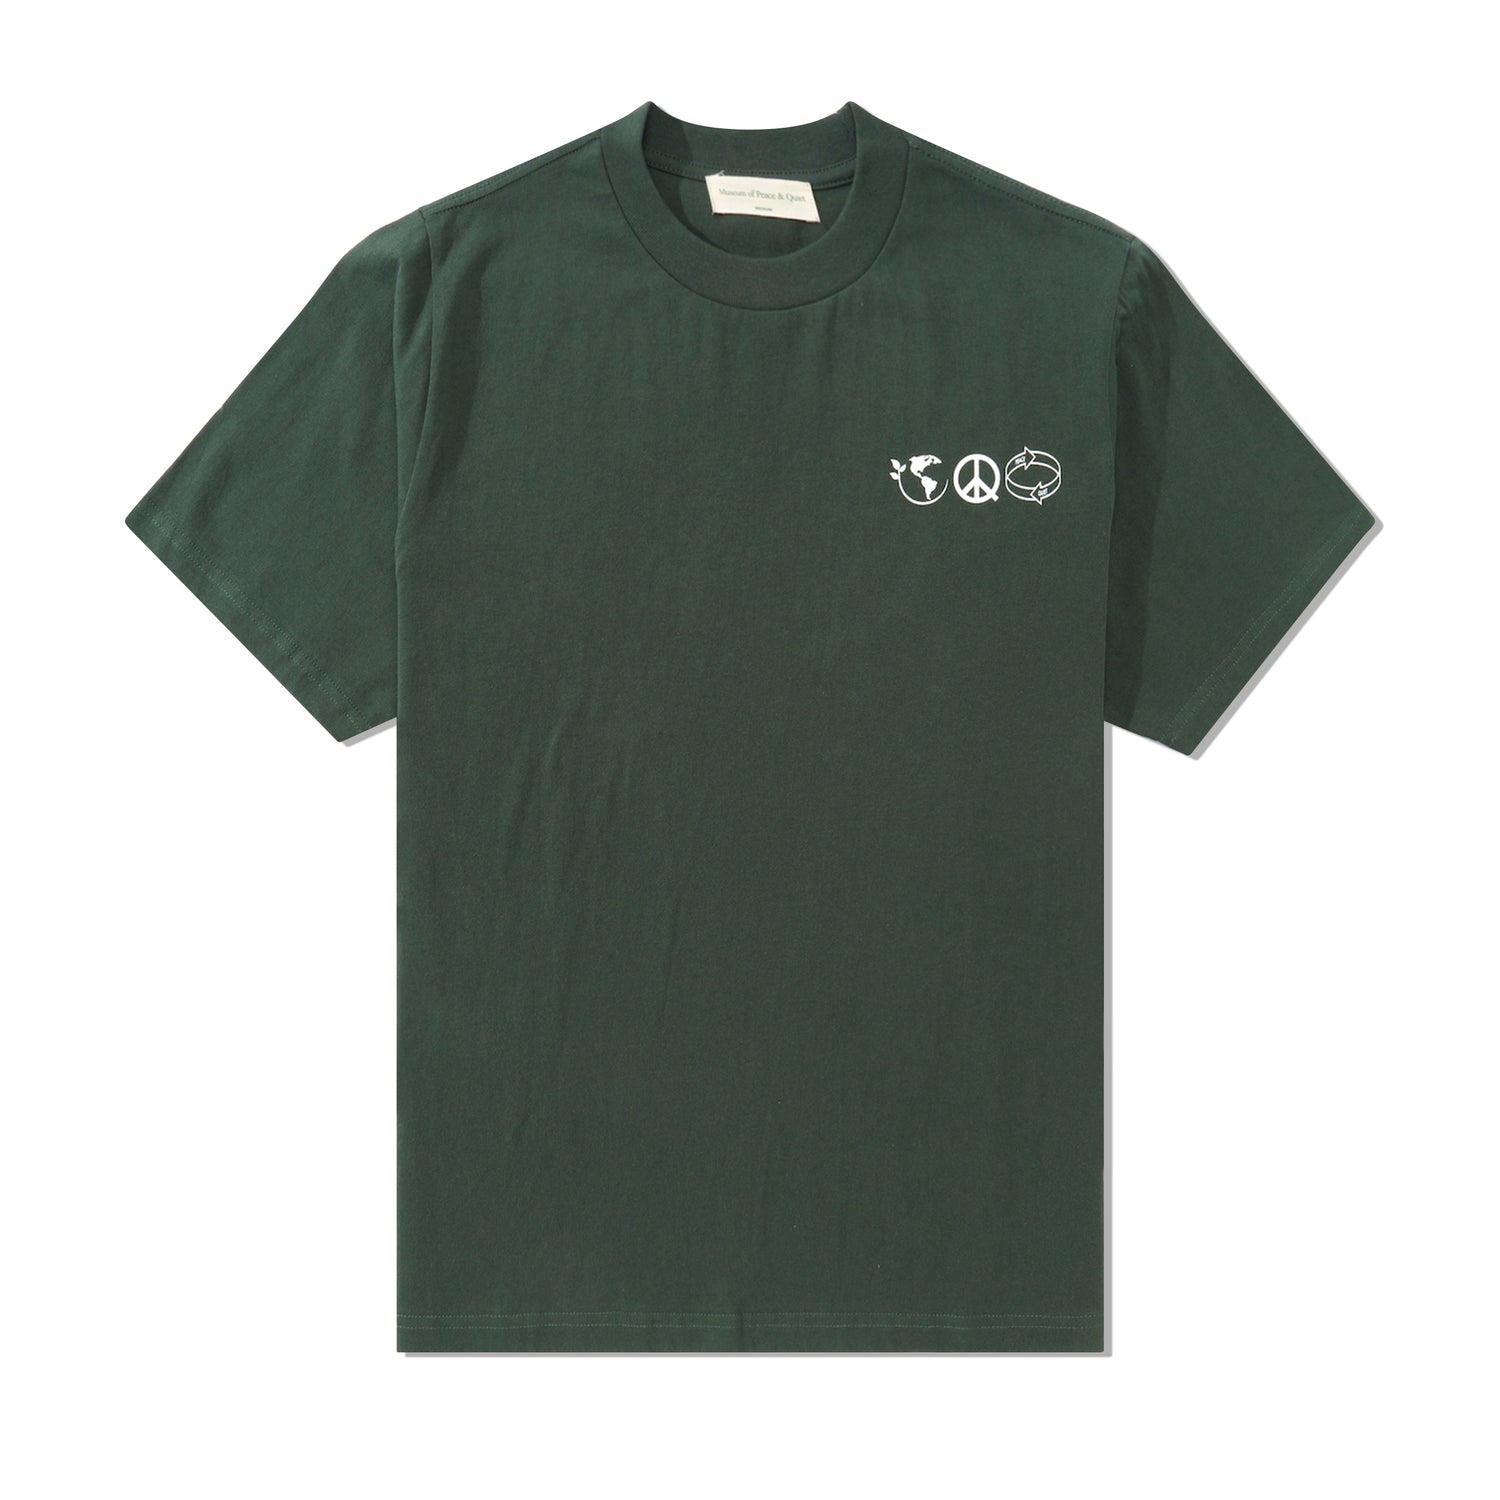 Slow Living Tee, Forest